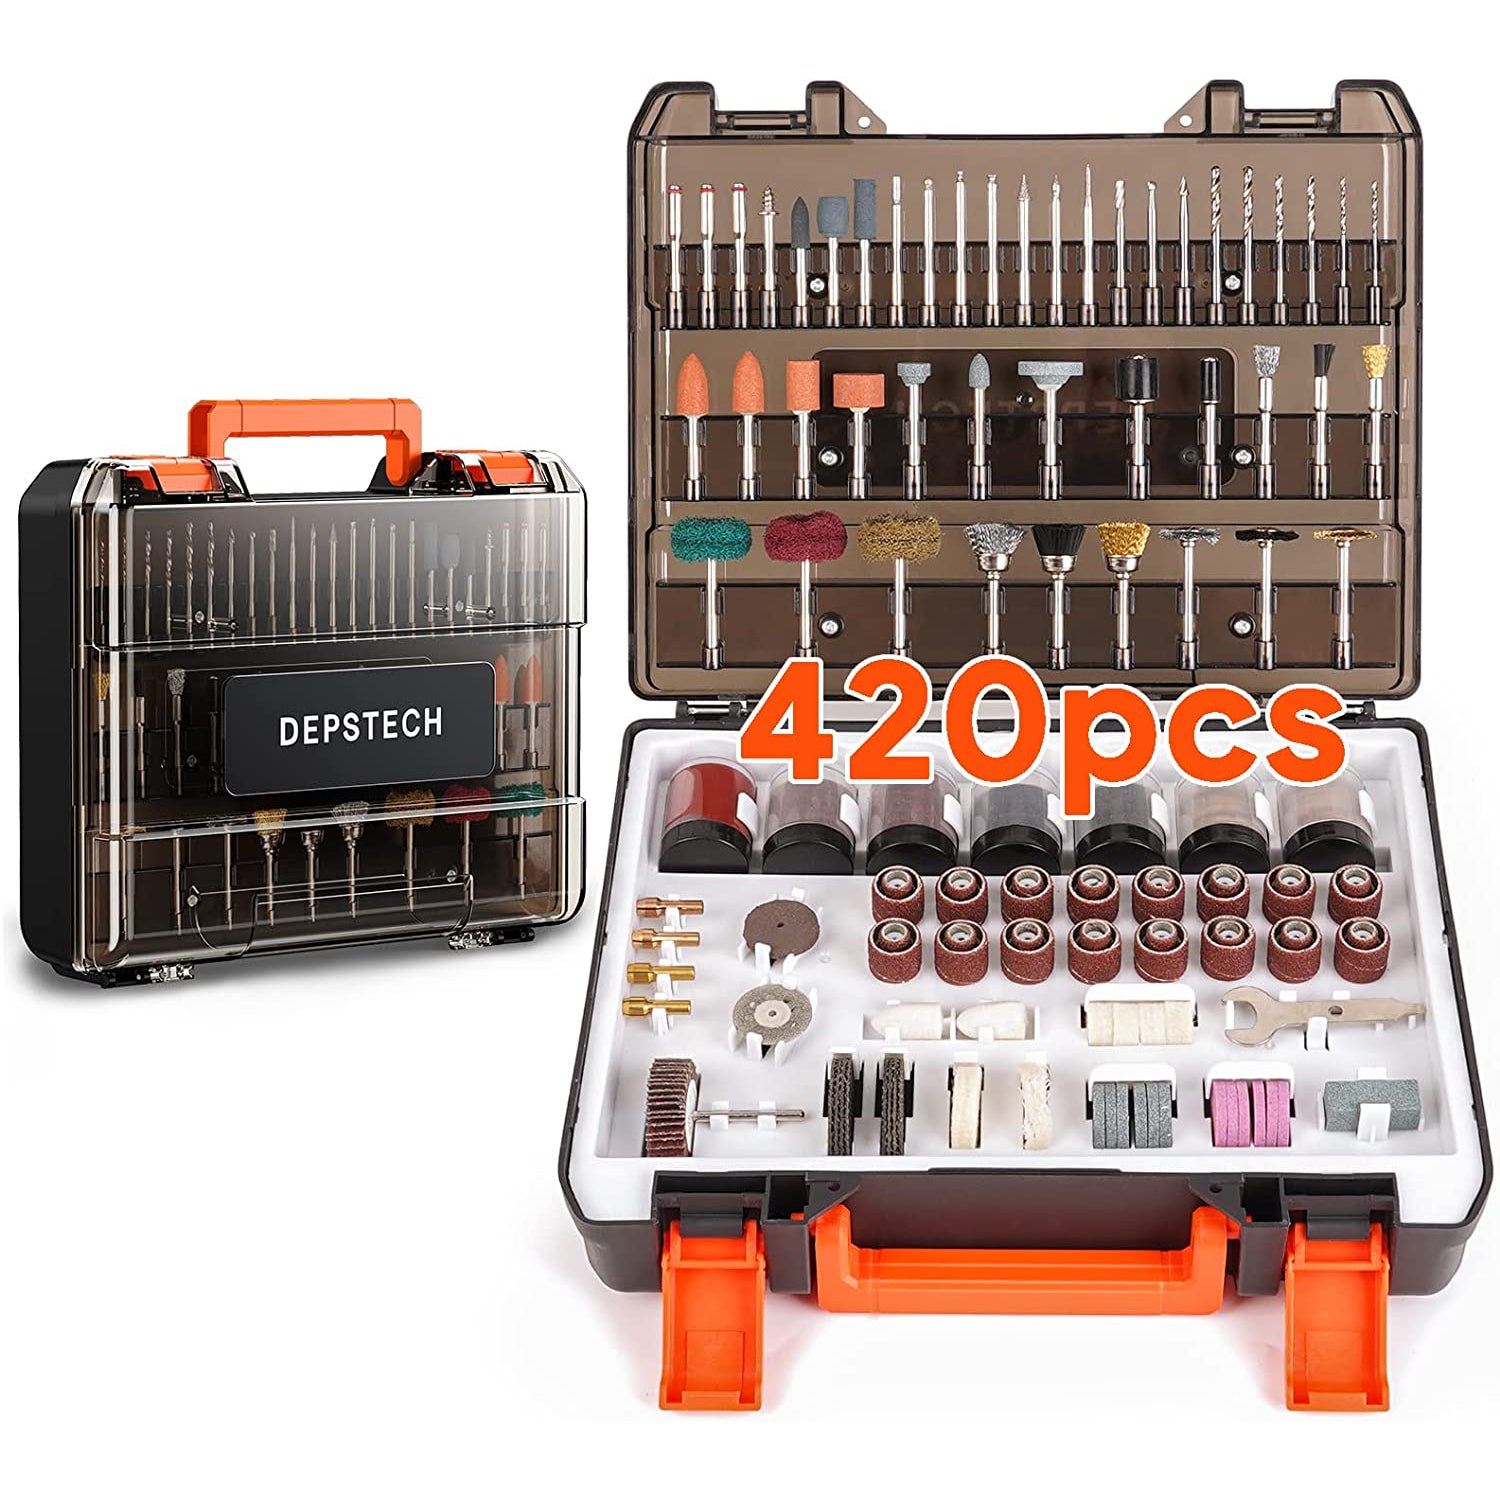 DEPSTECH 180W Corded Rotary Tool, DIY Wood Carving Tool Kit